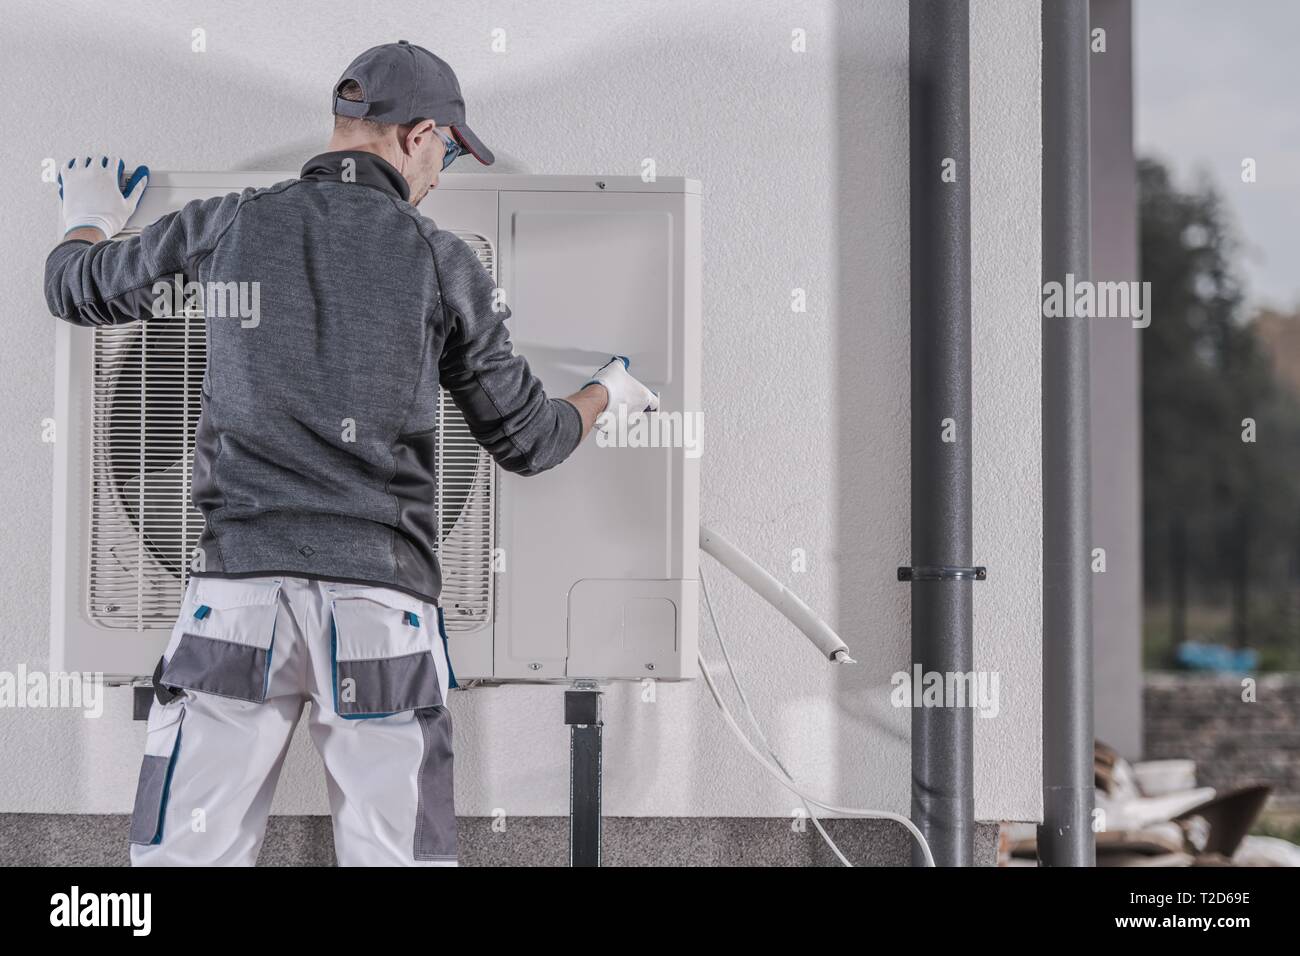 Heat Pump Replacing by Professional Caucasian Heating Technician. Industrial Theme. Stock Photo